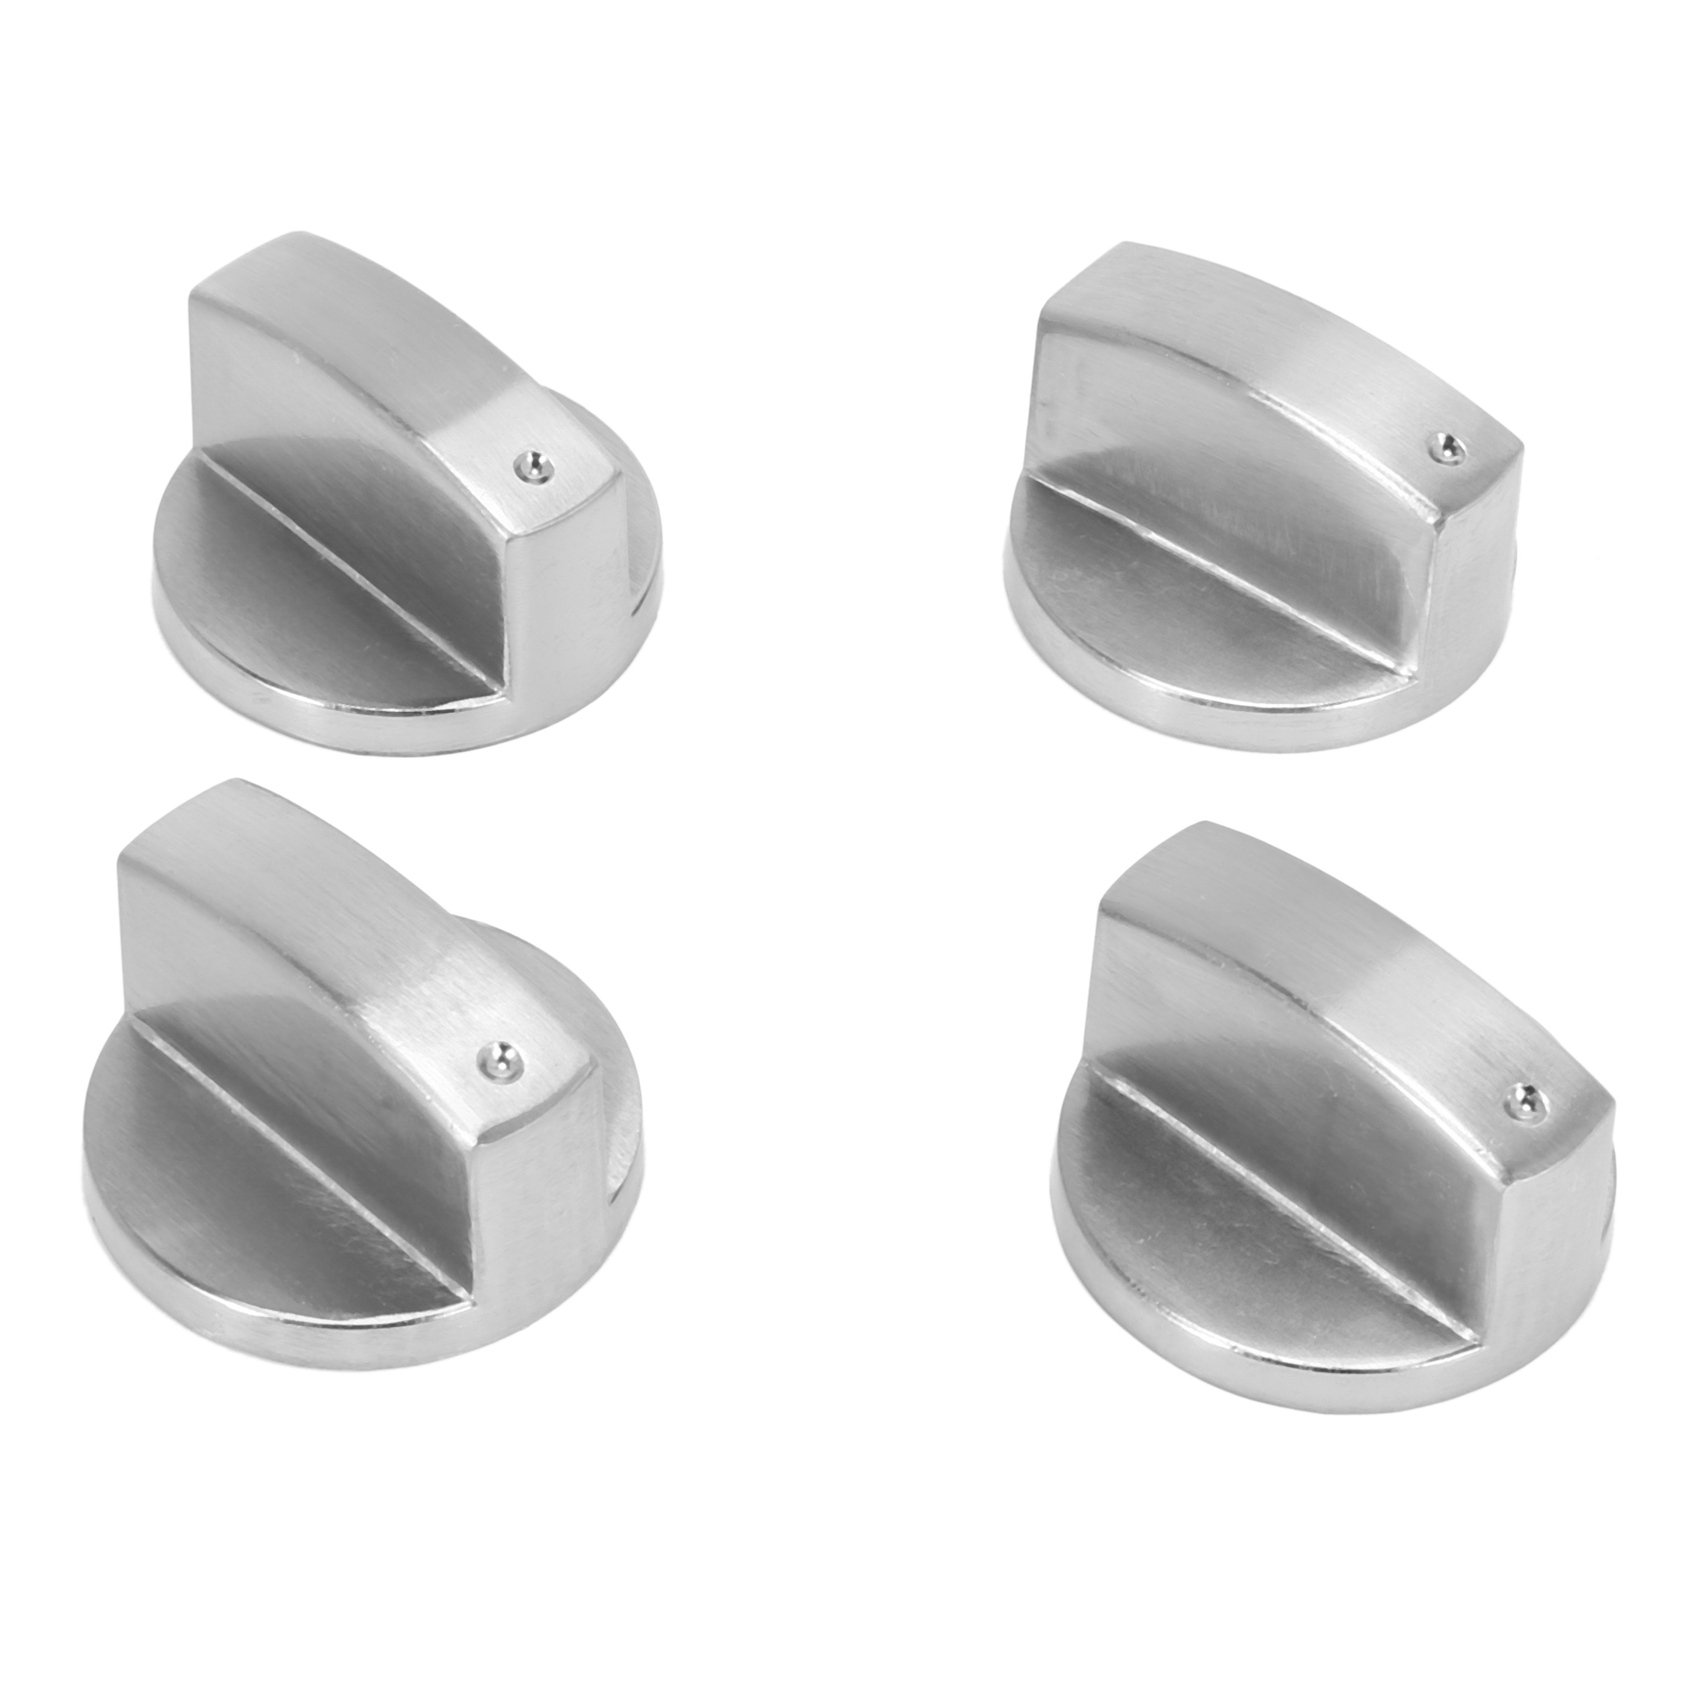 4pcs Nrpfell Stoves Cooker Knobs,Oven Knob ,6mm Universal Silver Gas Stove Control Knobs Adaptors Oven Rotary Switch Cooking Surface Control Locks